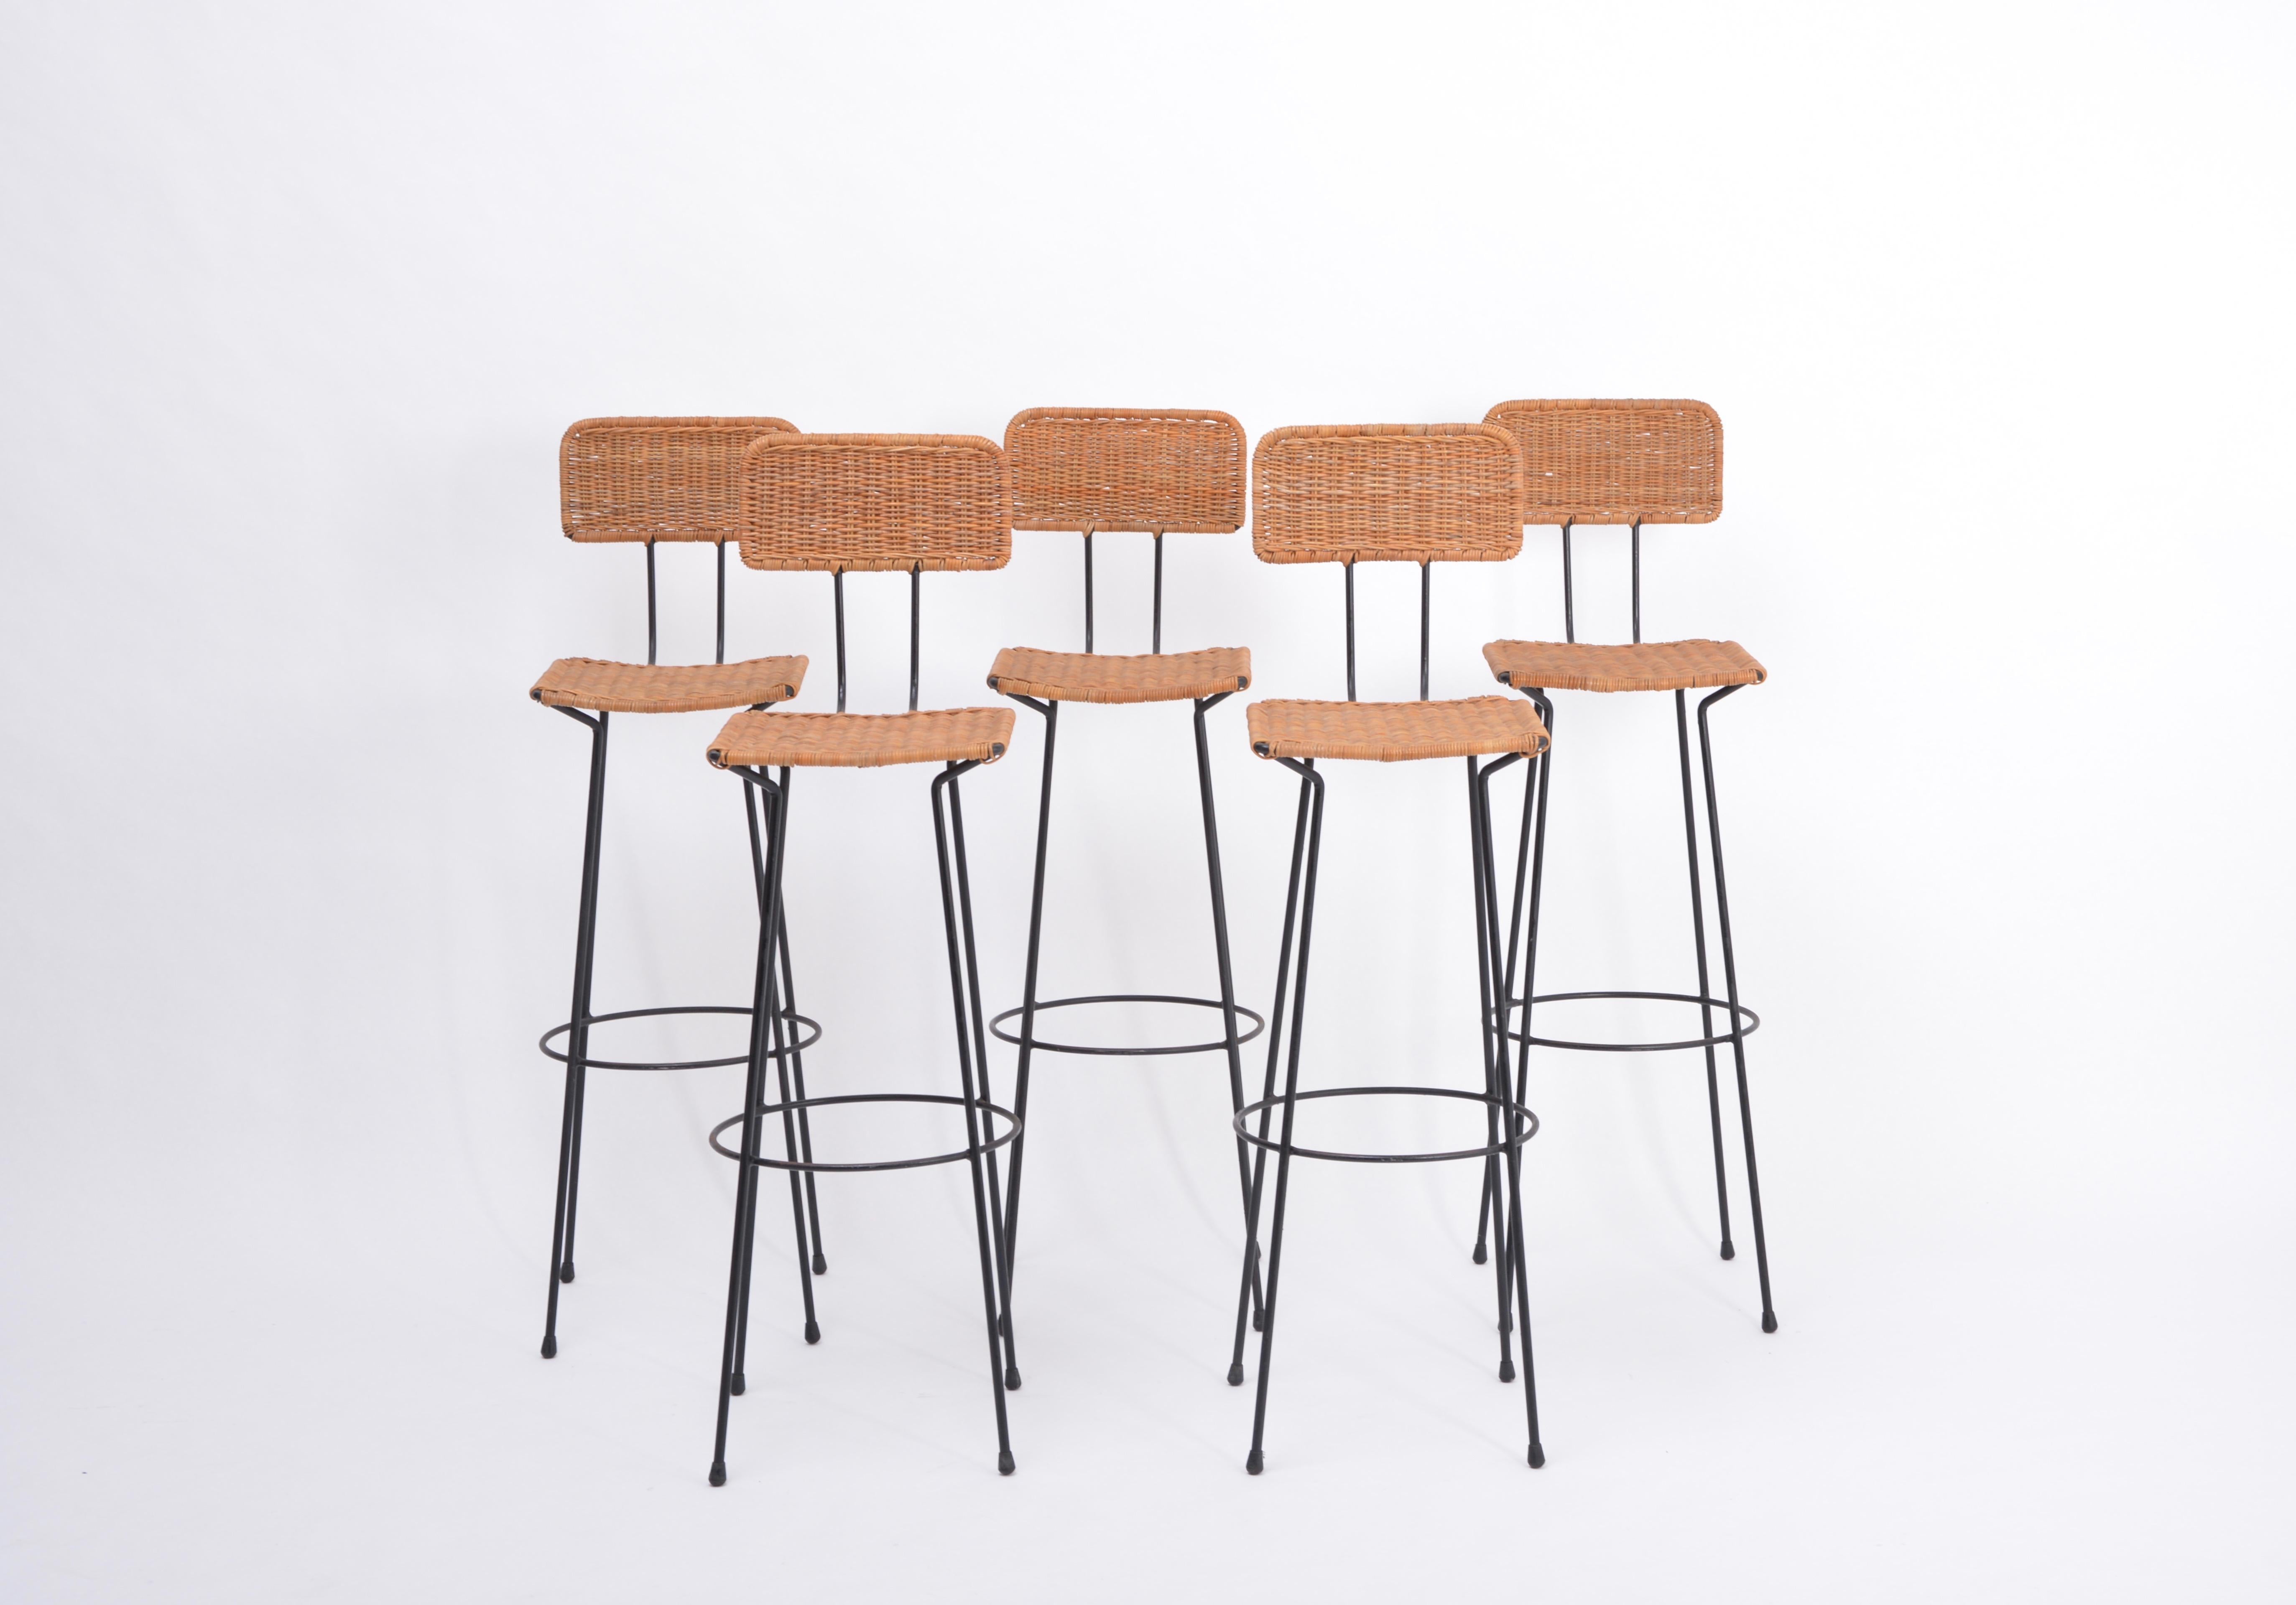 Rare set of five bar stools designed by Swiss architect Gian Franco Legler in 1951. The stools have solid metal black painted frames and handwoven cane seats and backs - very nicely manufactured. Absolutely beautiful design classics - with minor